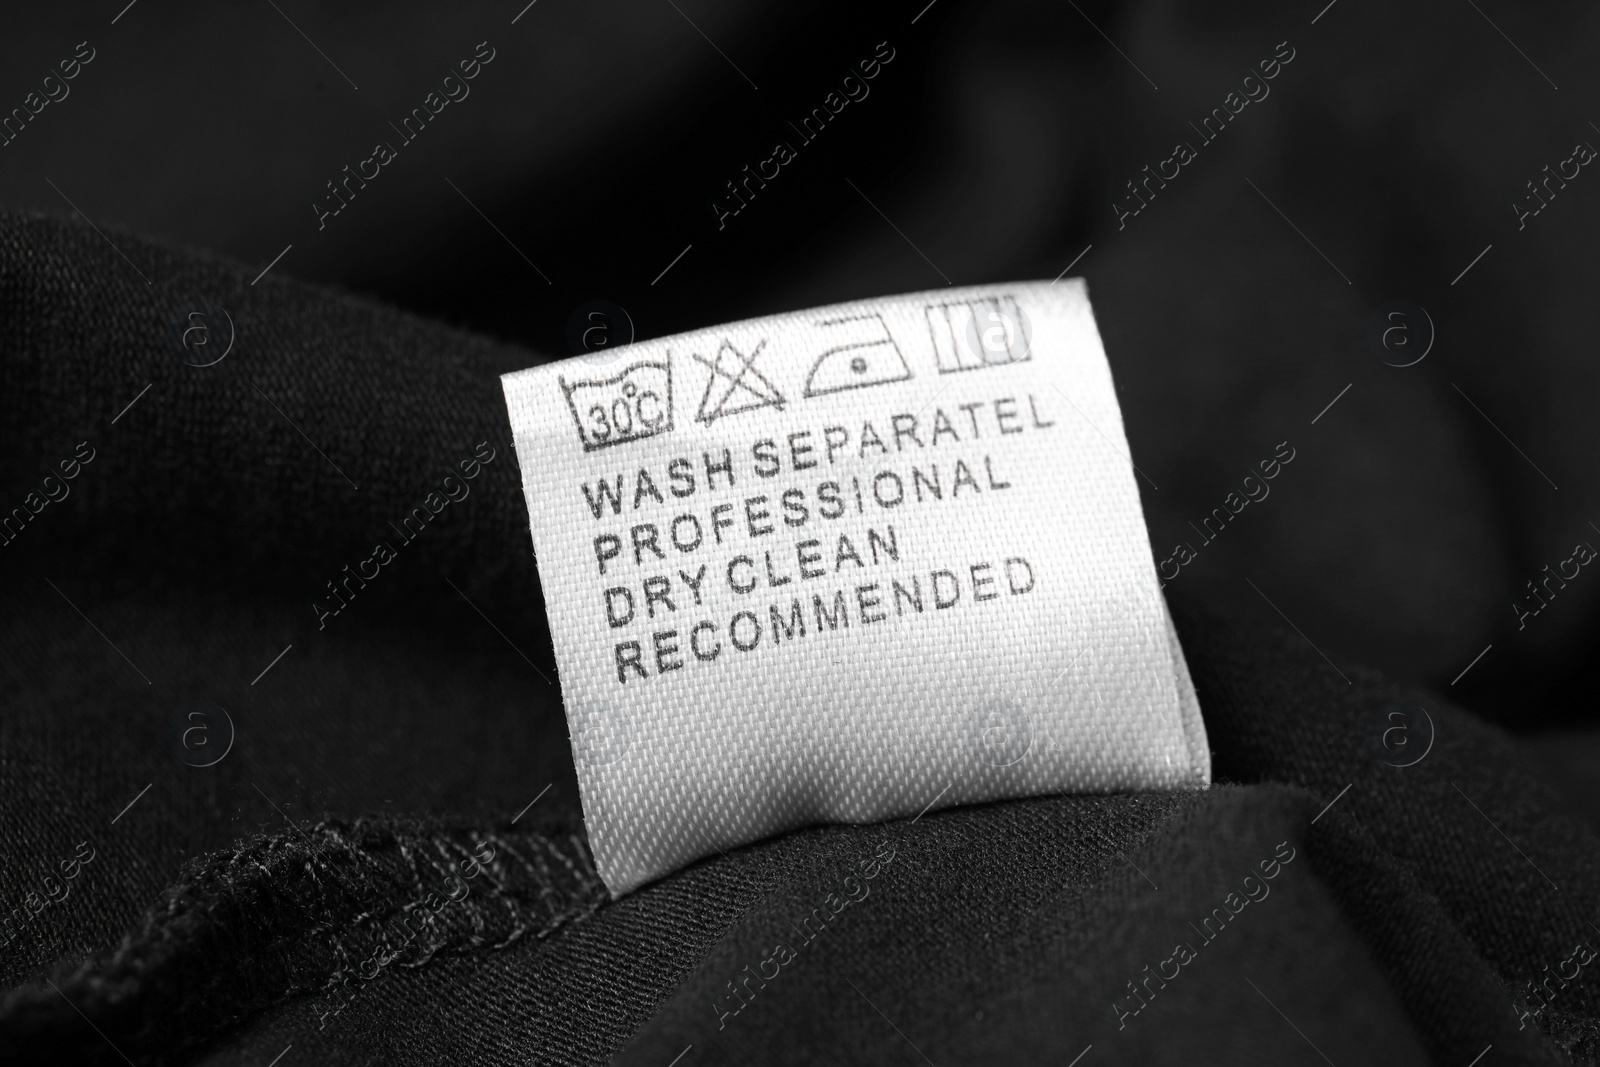 Photo of Clothing label with recommendations for care on black garment, closeup